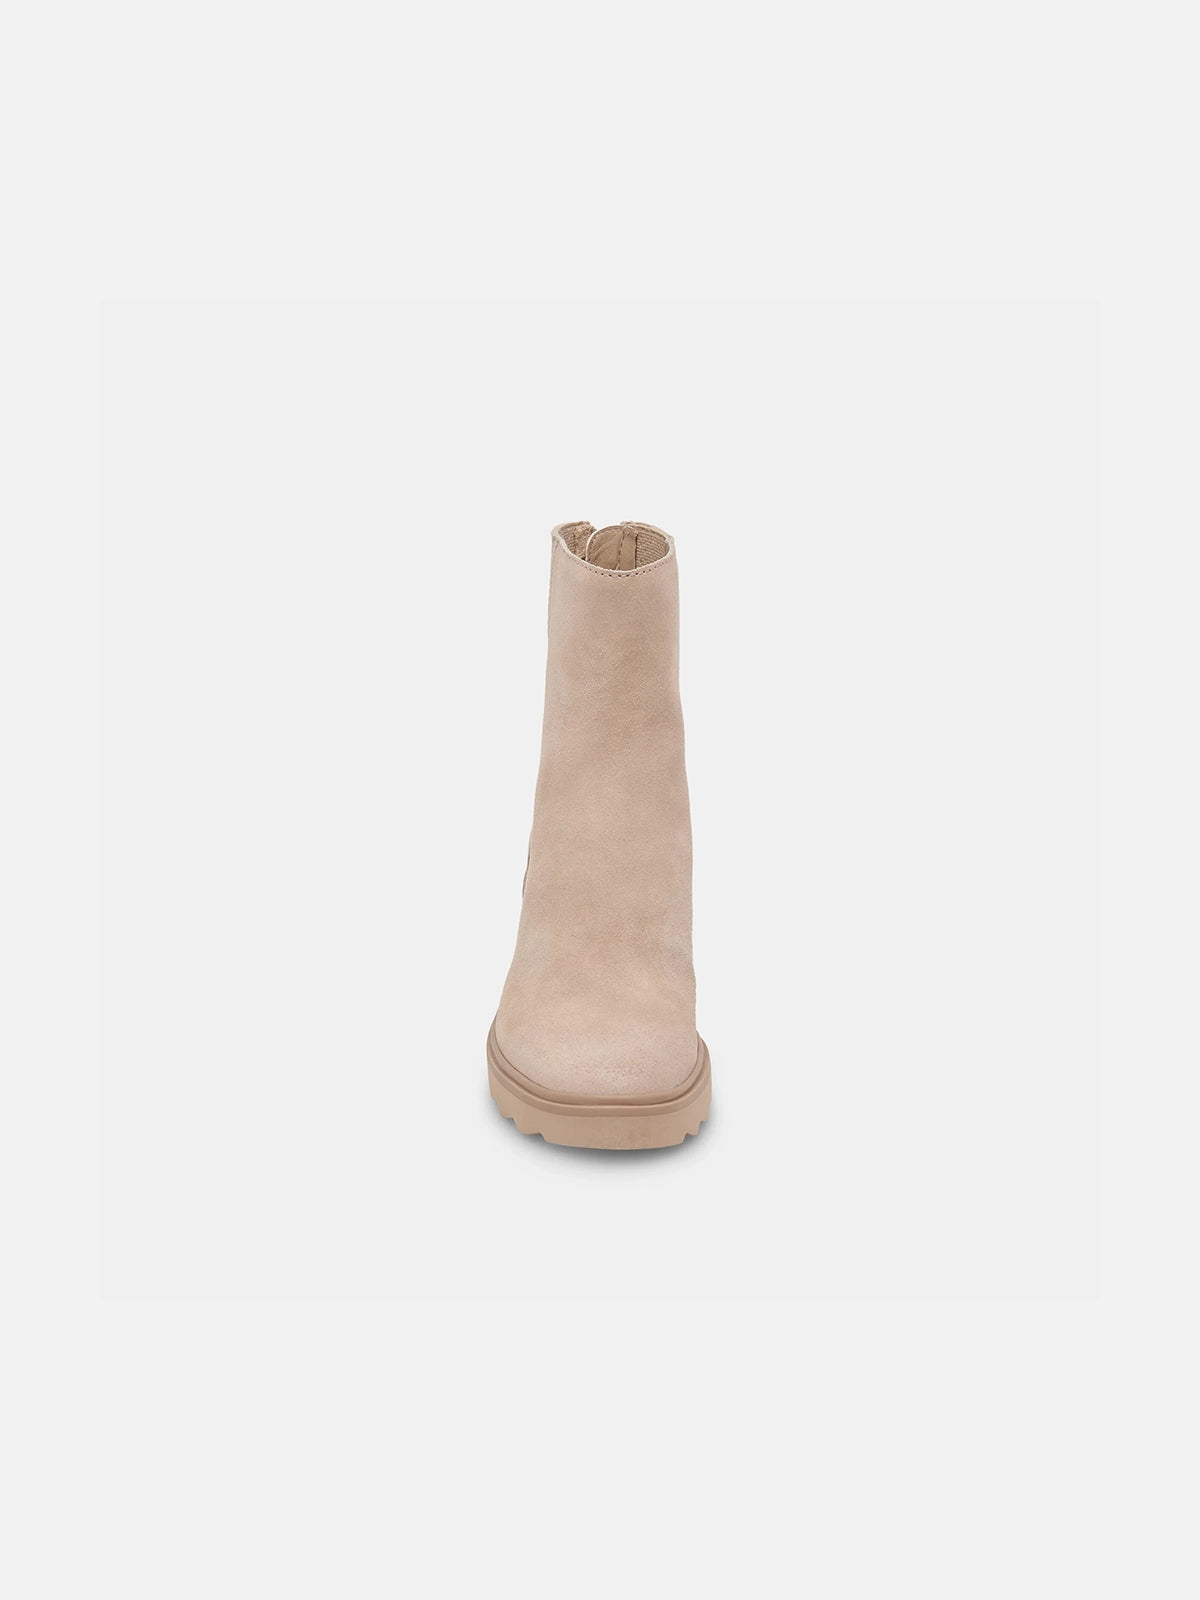 dolce vita martey h2o boots in taupe suede